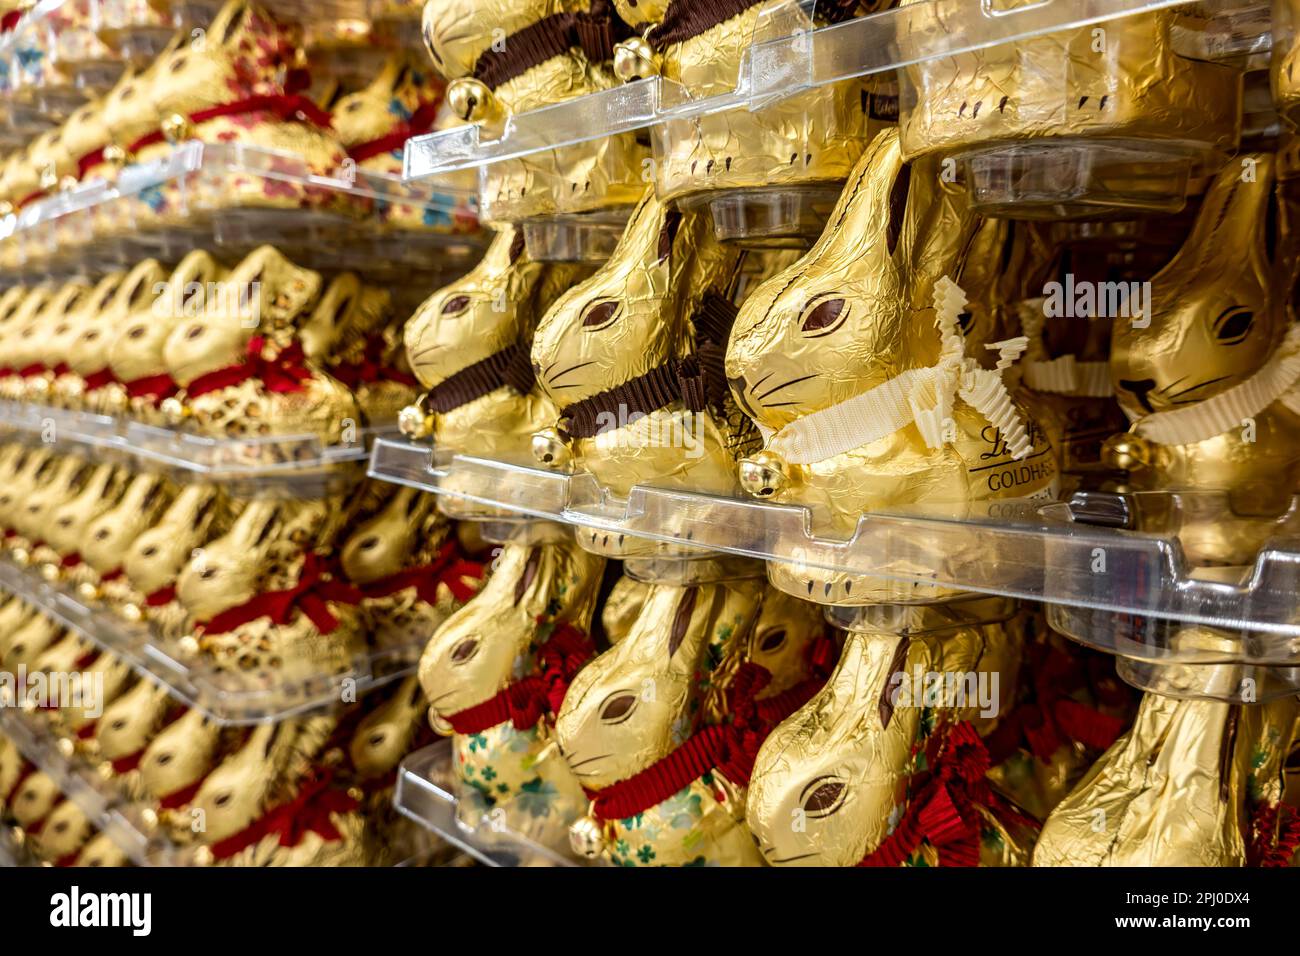 Many chocolate Easter bunnies, chocolate bunnies, Lindt gold bunnies, pallet in supermarket, shopping centre, Germany Stock Photo